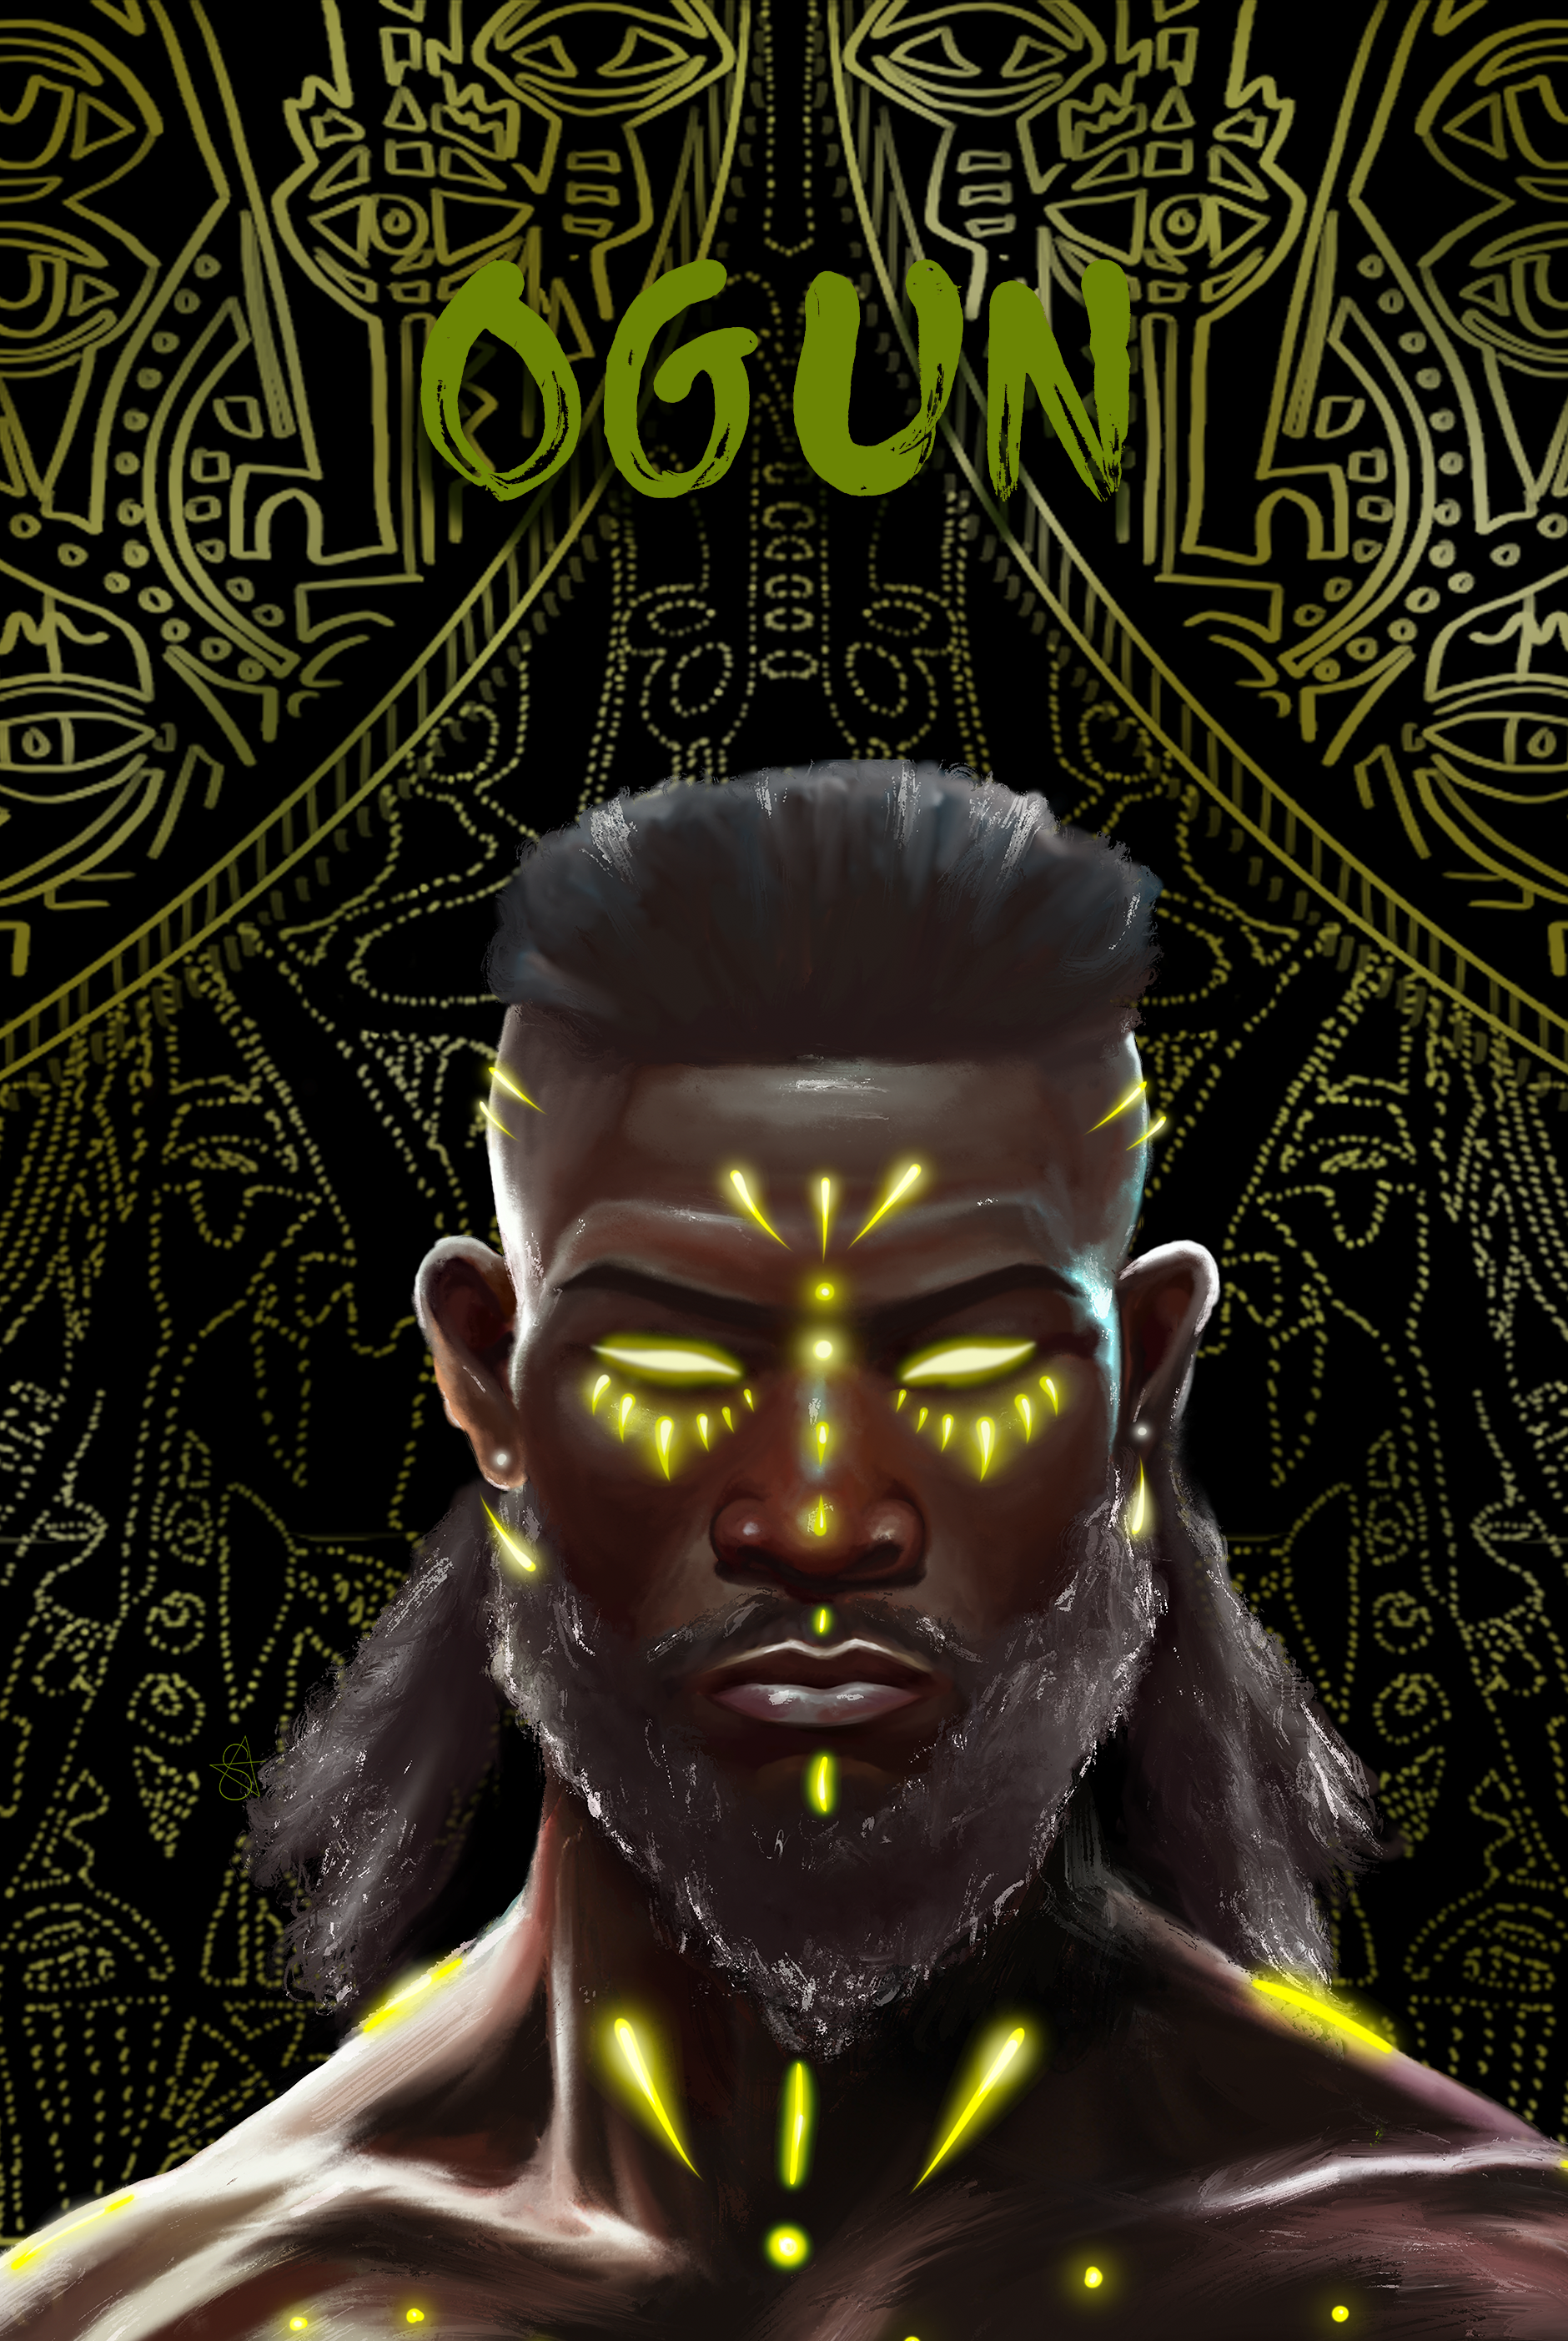 Ogun Holographic Art Print on high-quality matte or velvet paper, framed in gallery black, white, or natural maple, depicting Yoruba Orisa of war and iron.